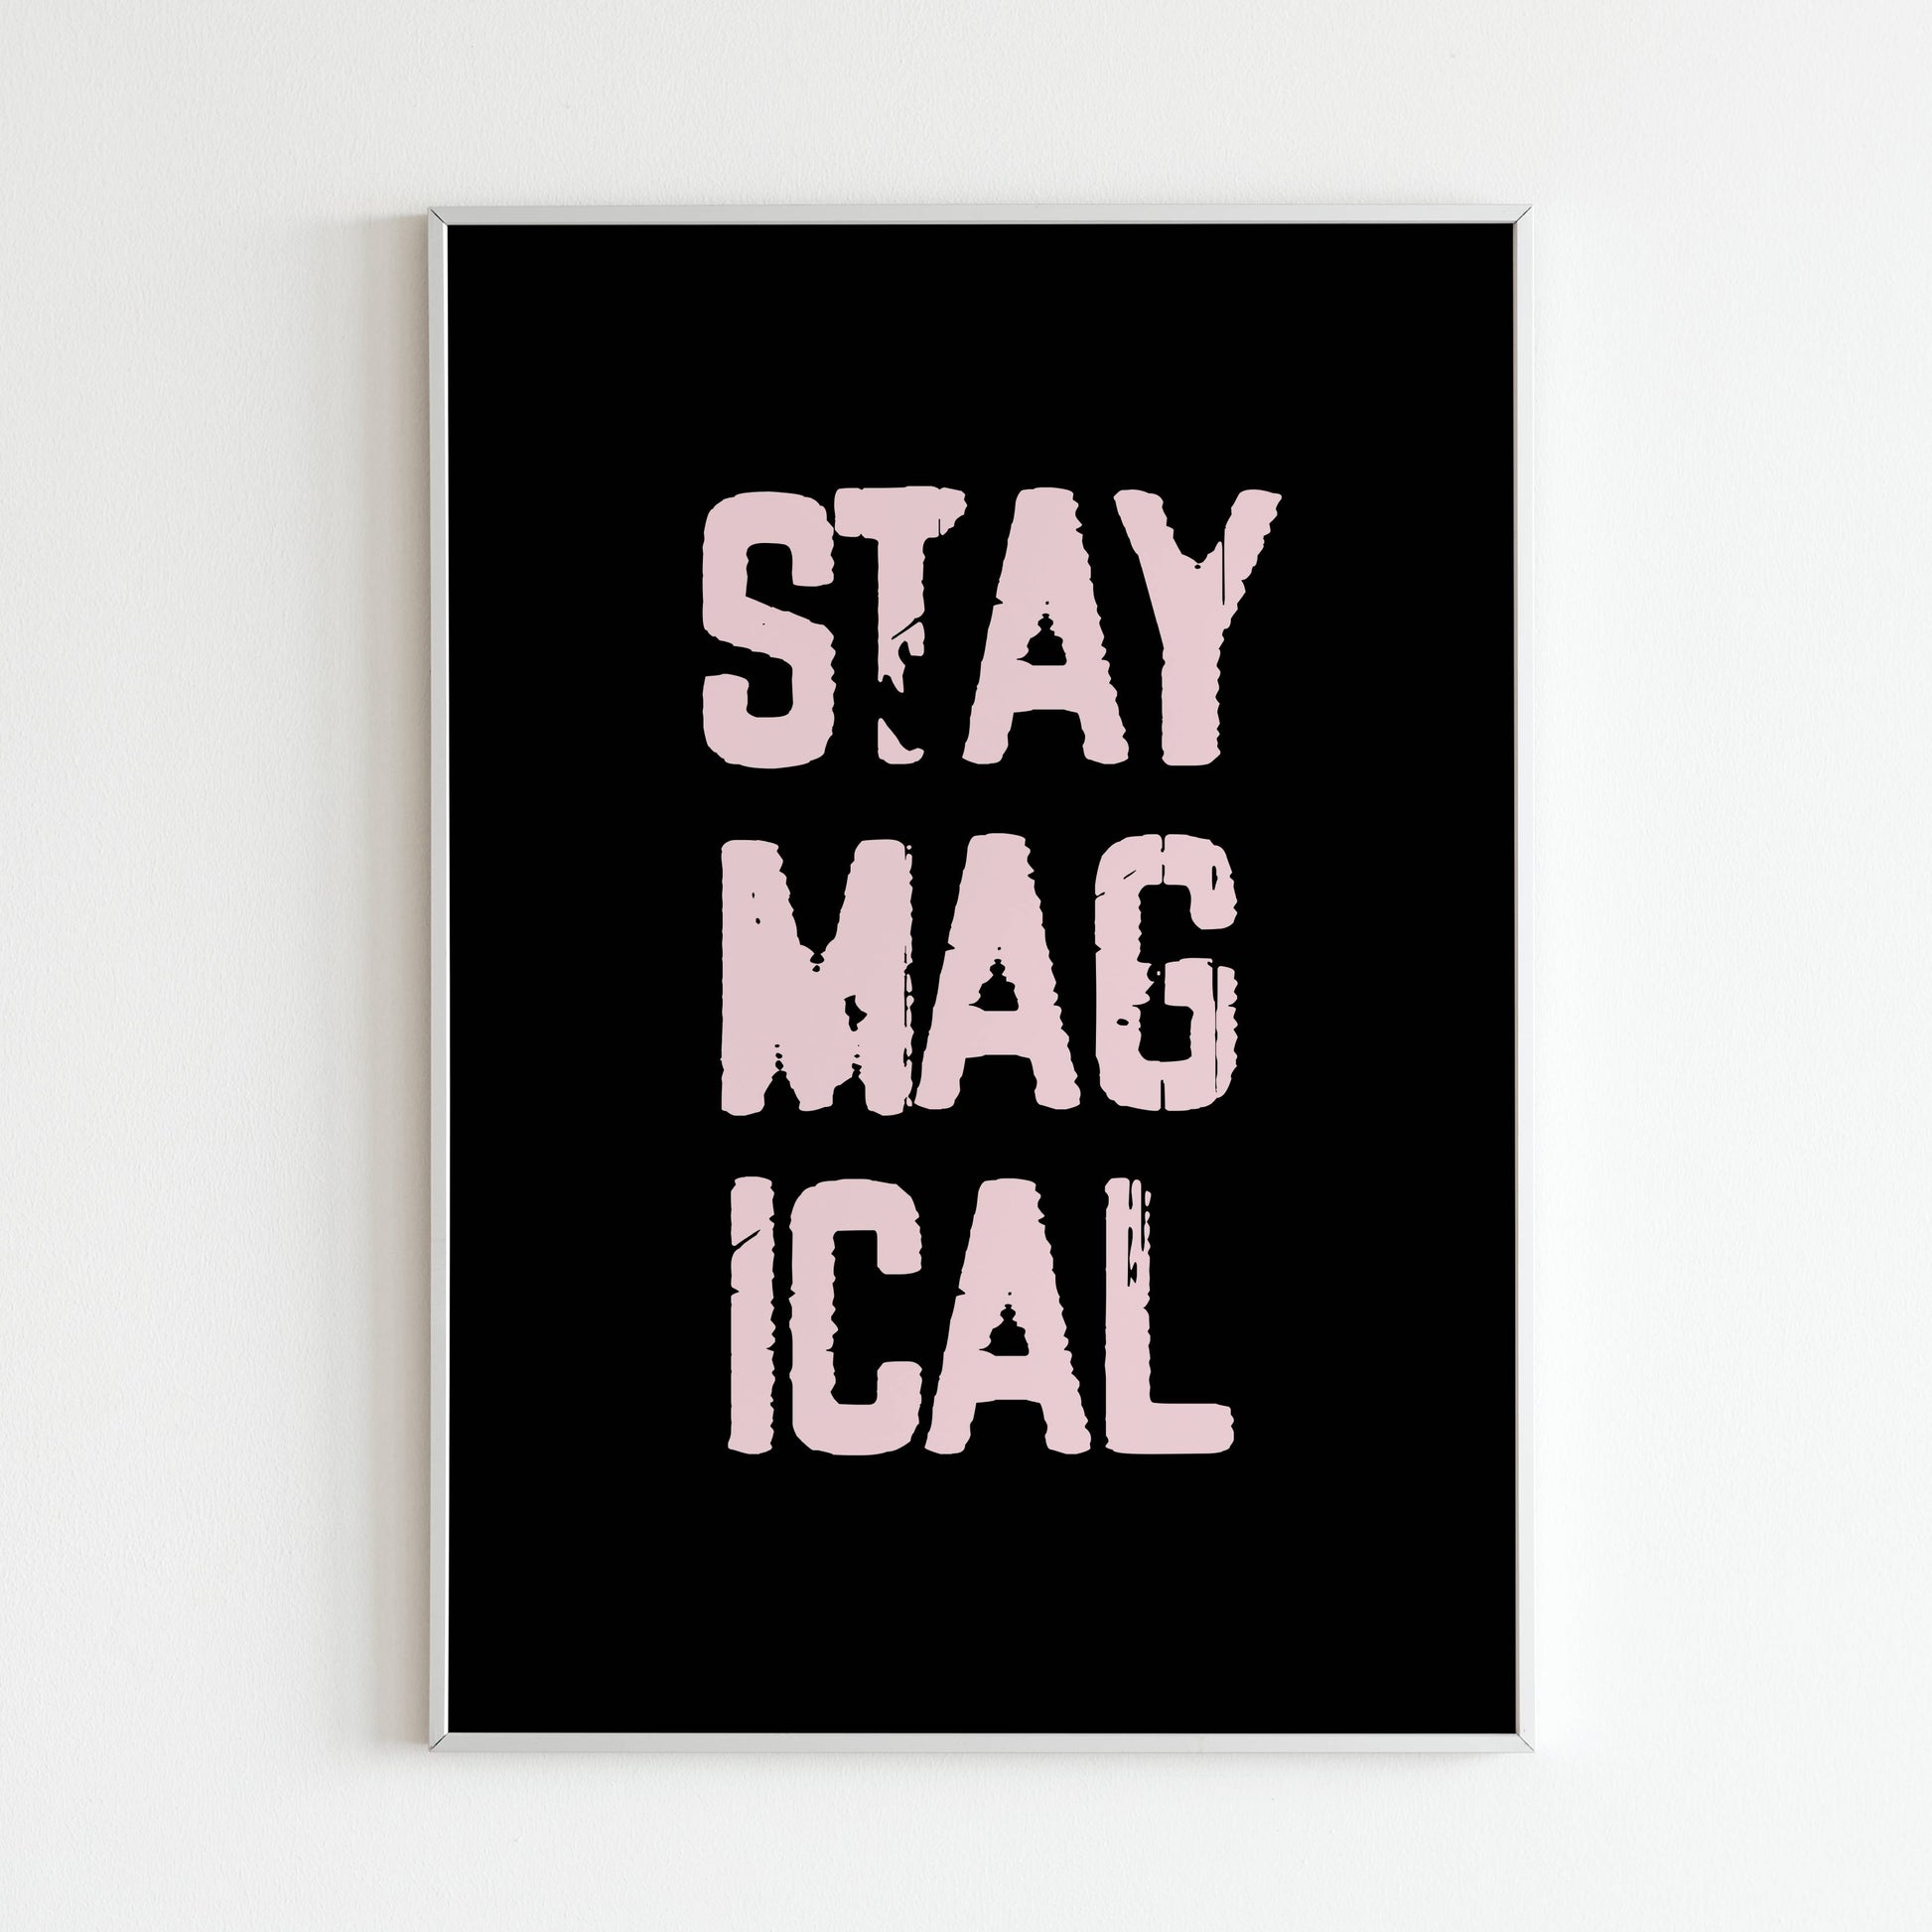 "Stay Magical close-up of printable wall art poster. Focus on the whimsical imagery and inspirational message